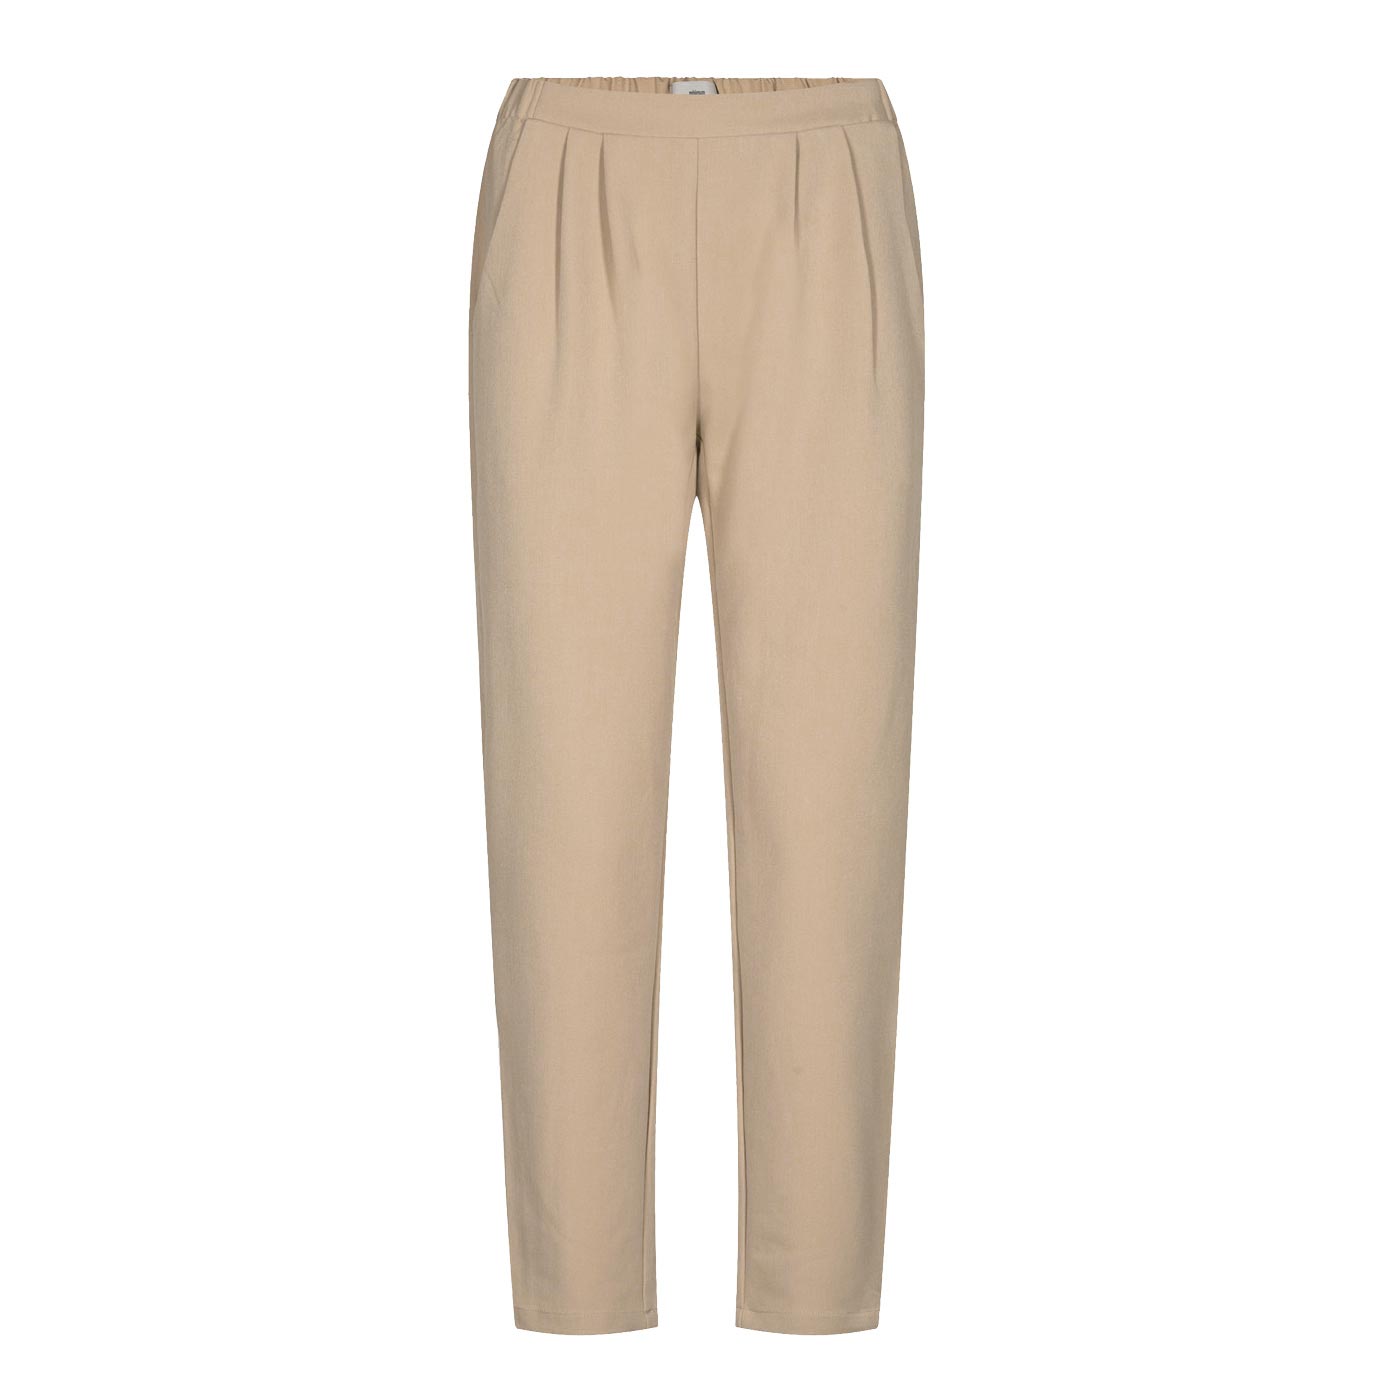 BUIgtTklOP Pants For Women Clearance Women's Solid Color Casual